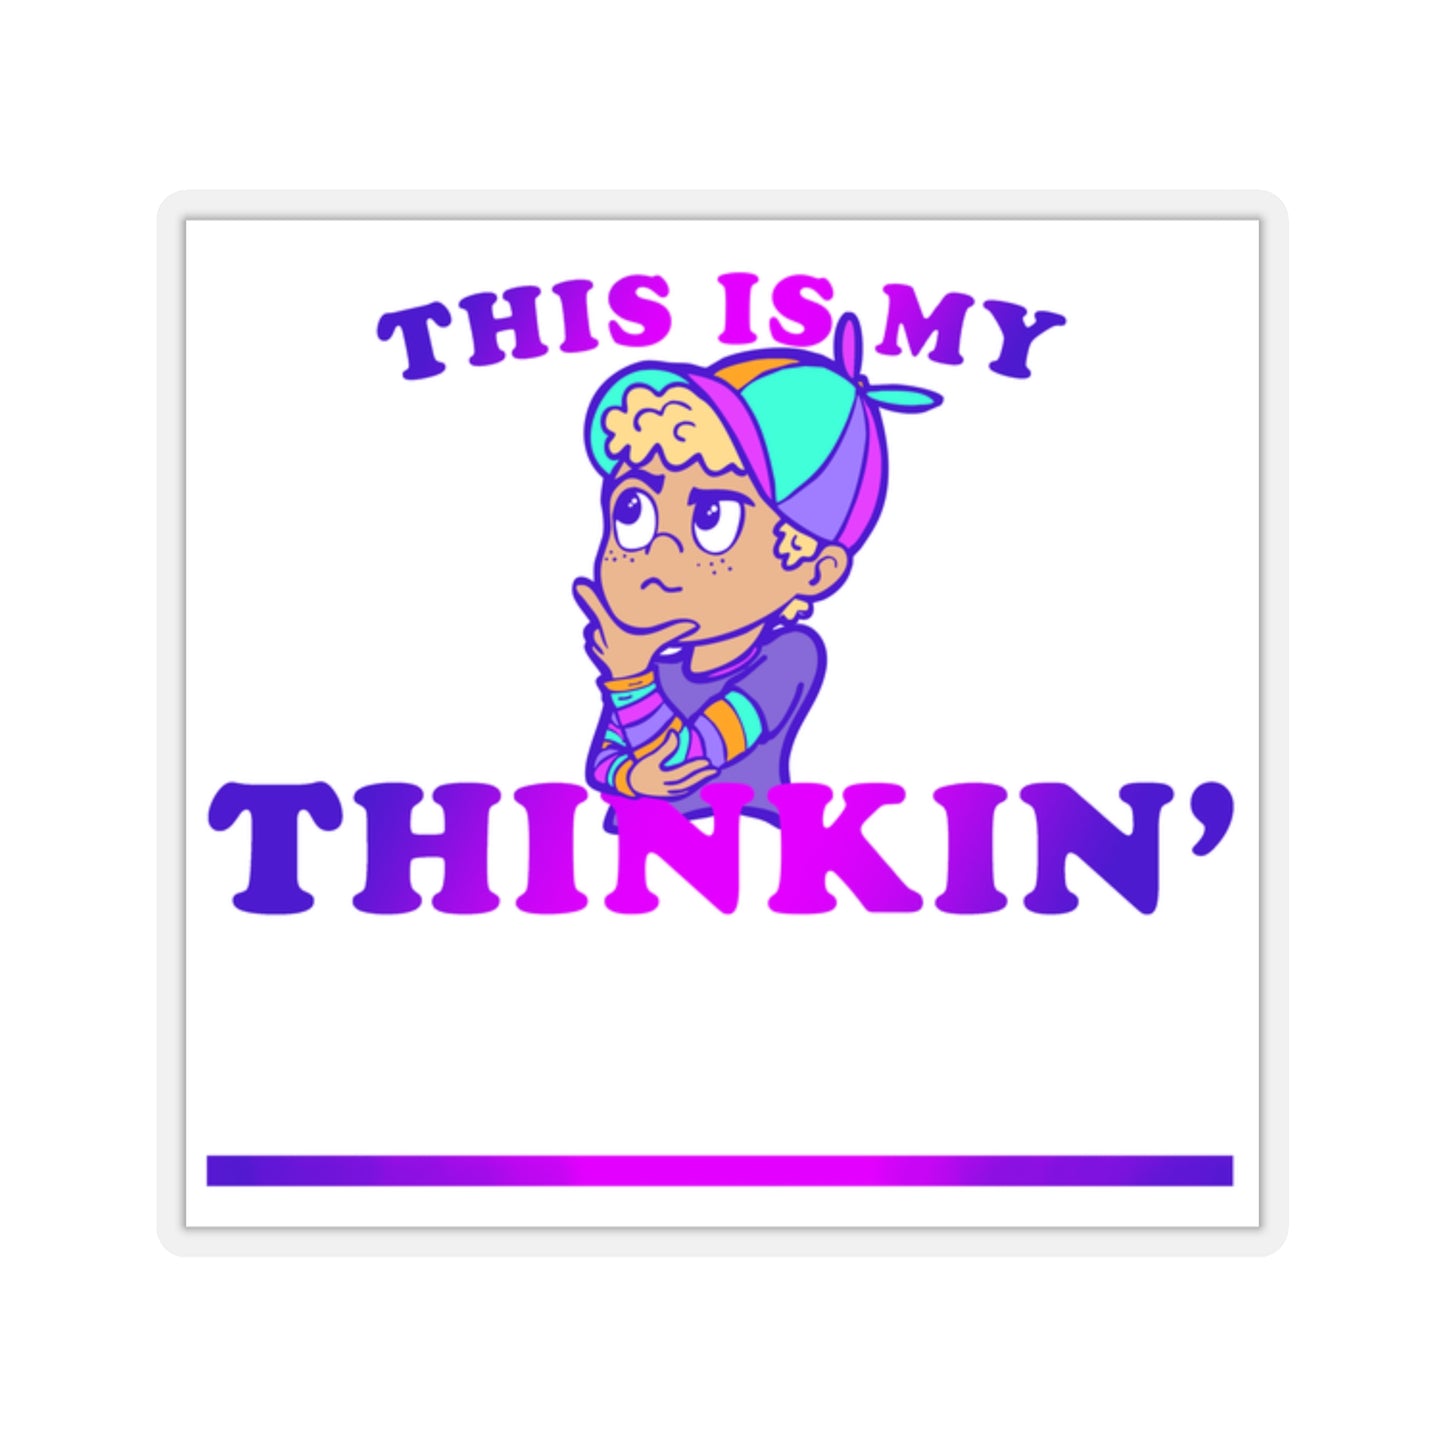 "This is My Thinkin' (fill in the blank)" - White - Kiss-Cut Stickers